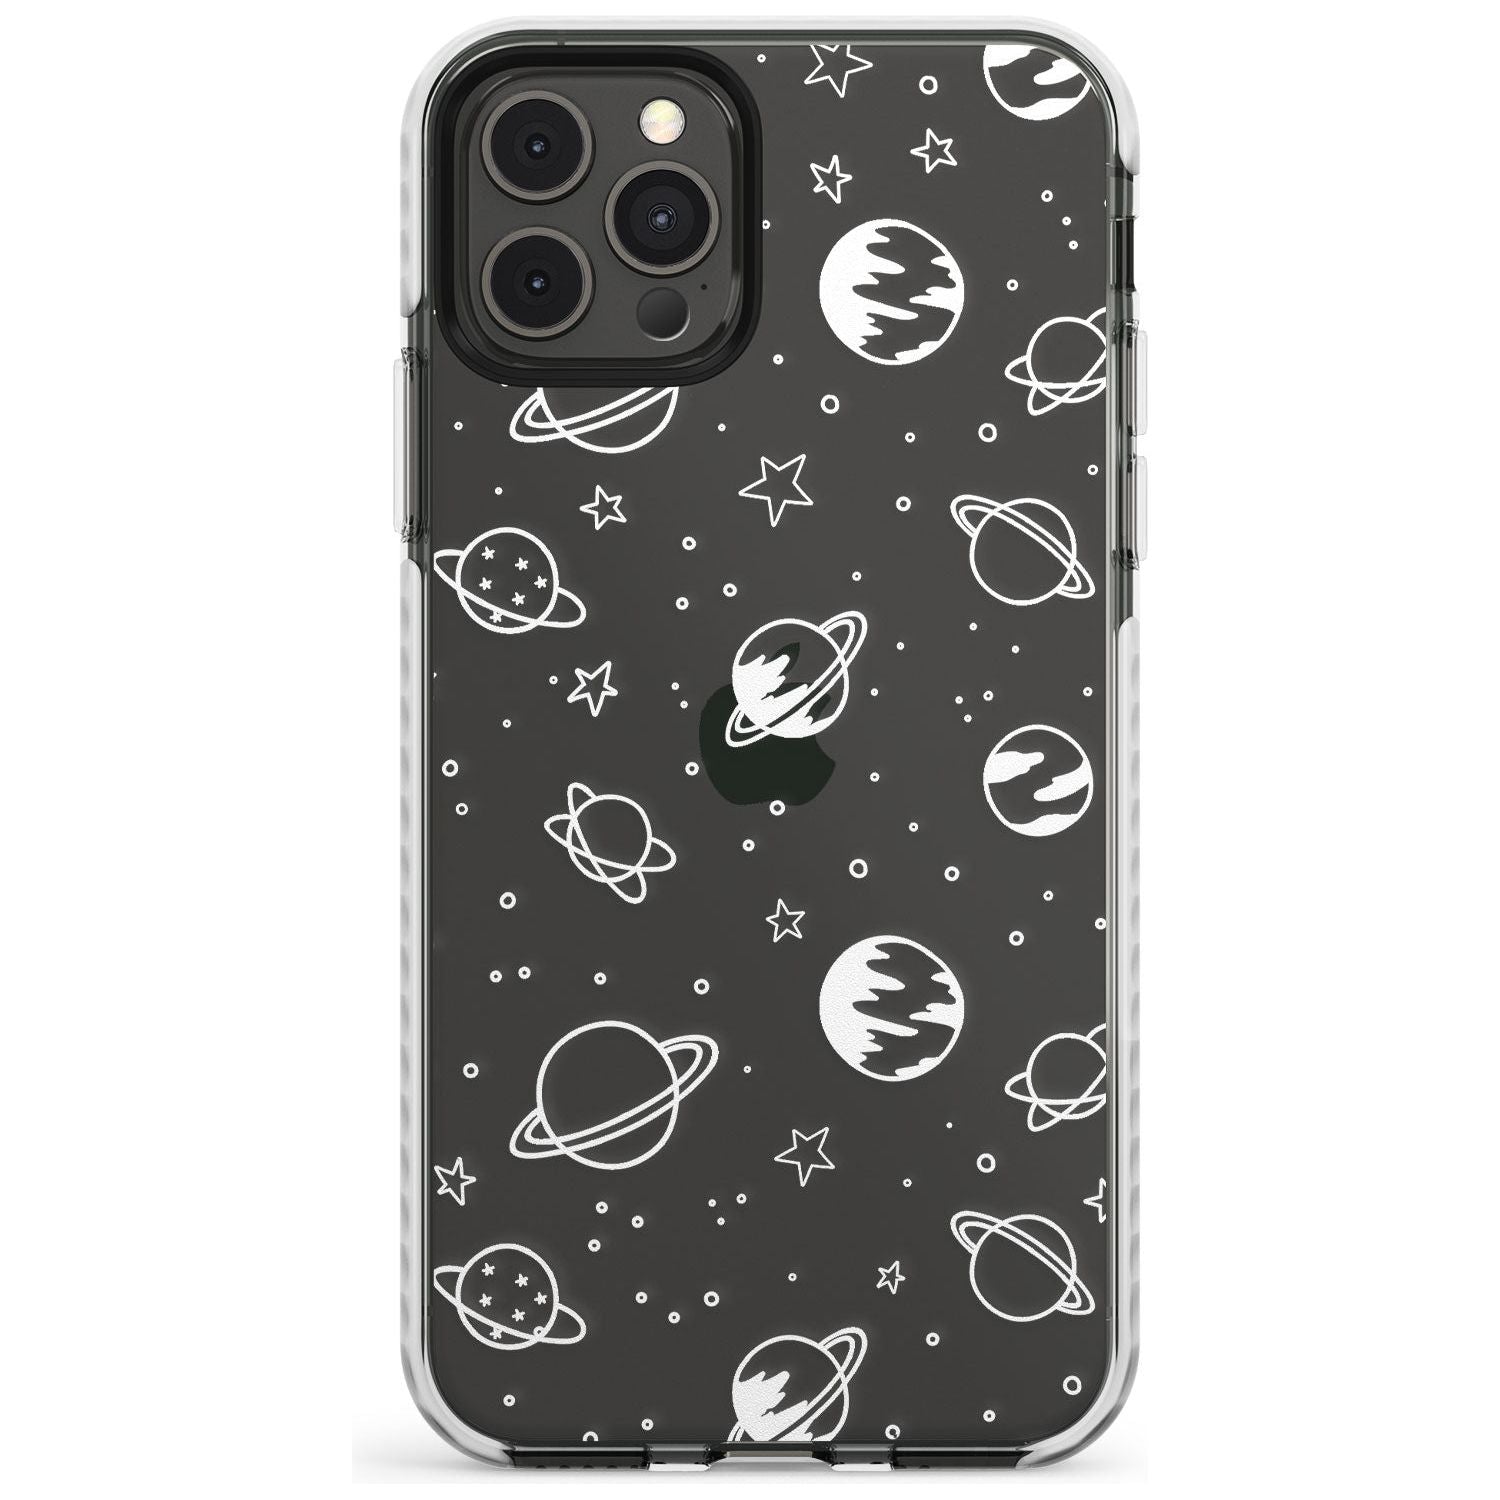 Outer Space Outlines: White on Clear Slim TPU Phone Case for iPhone 11 Pro Max